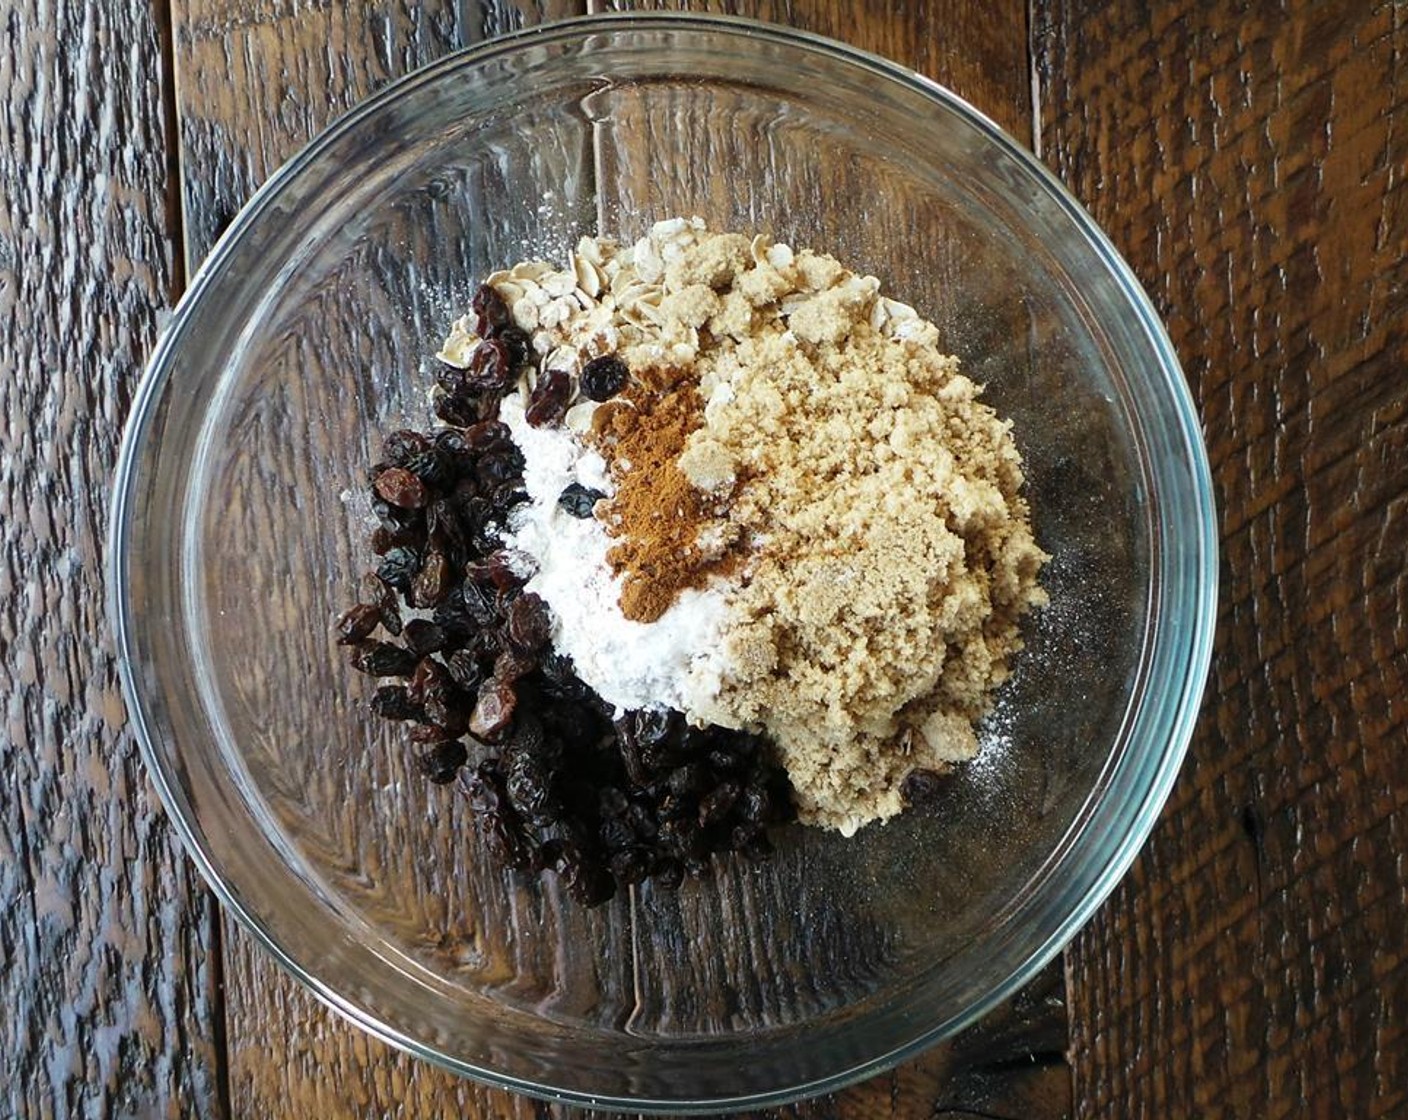 step 1 In a large bowl, mix together the All-Purpose Flour (1 cup), Old Fashioned Rolled Oats (1 cup), Brown Sugar (1/2 cup), Baking Powder (1/2 Tbsp), Baking Soda (1/2 tsp),Ground Cinnamon (1 tsp), and Raisins (1/2 cup).